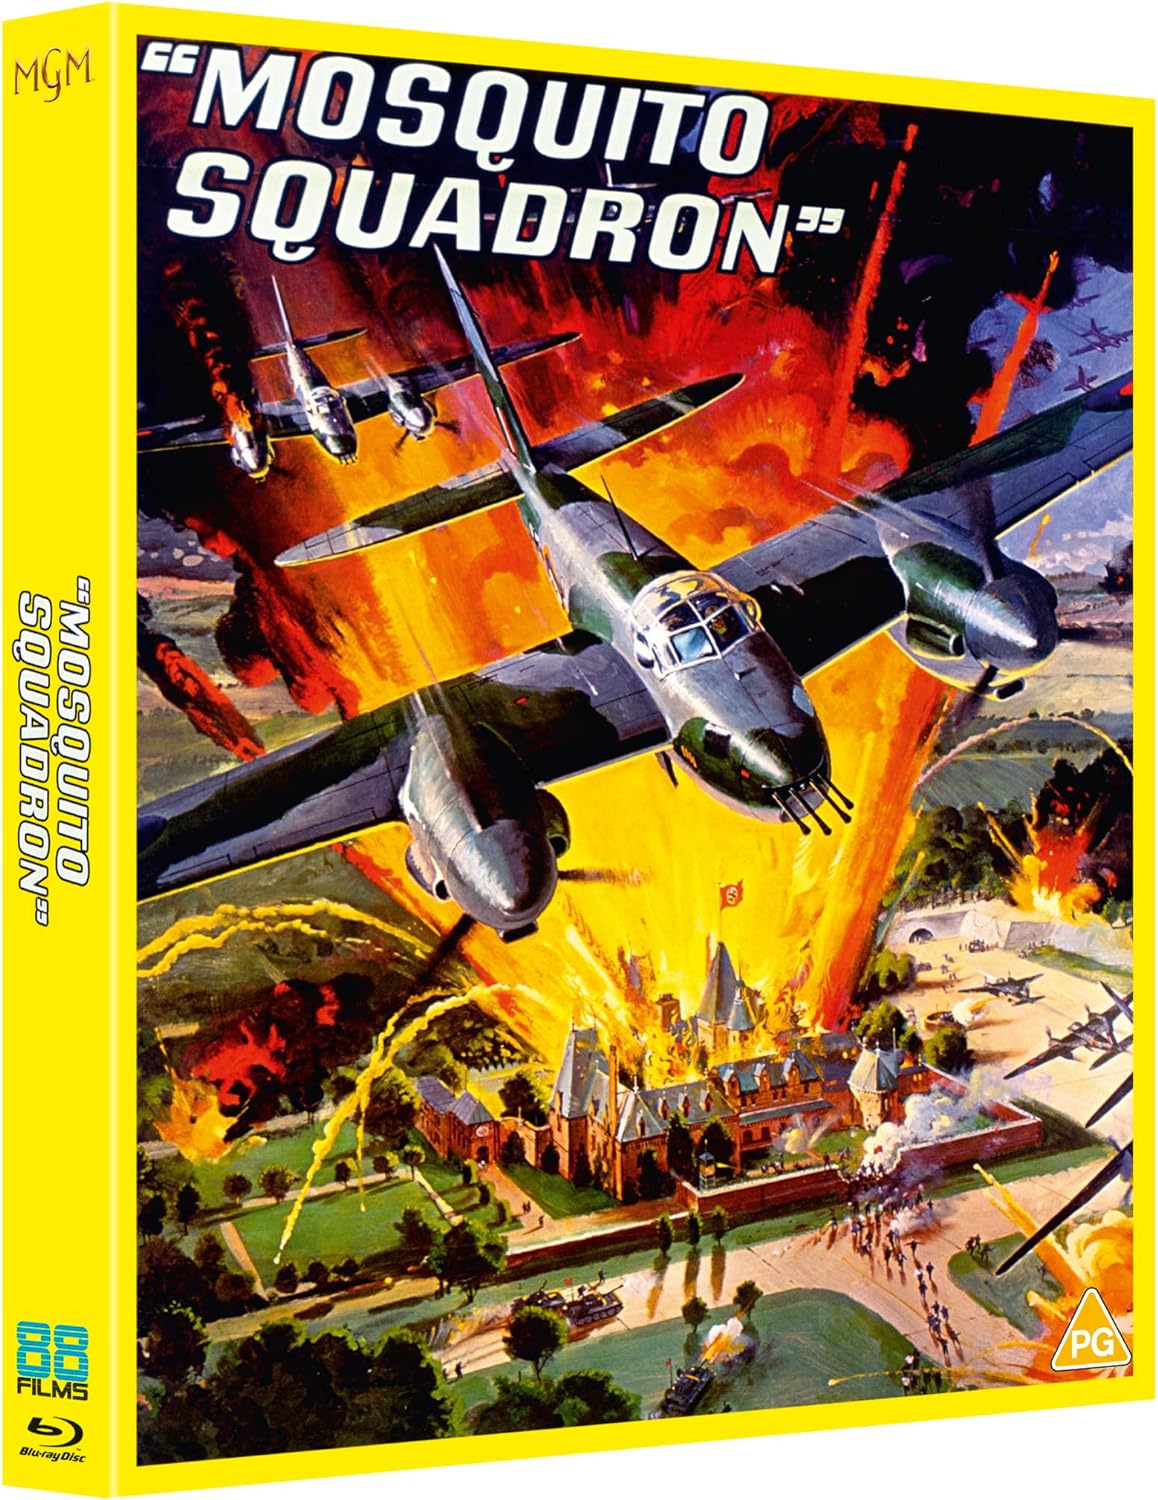 Mosquito Squadron Blu-ray with Slipcover (88 Films/Region B)